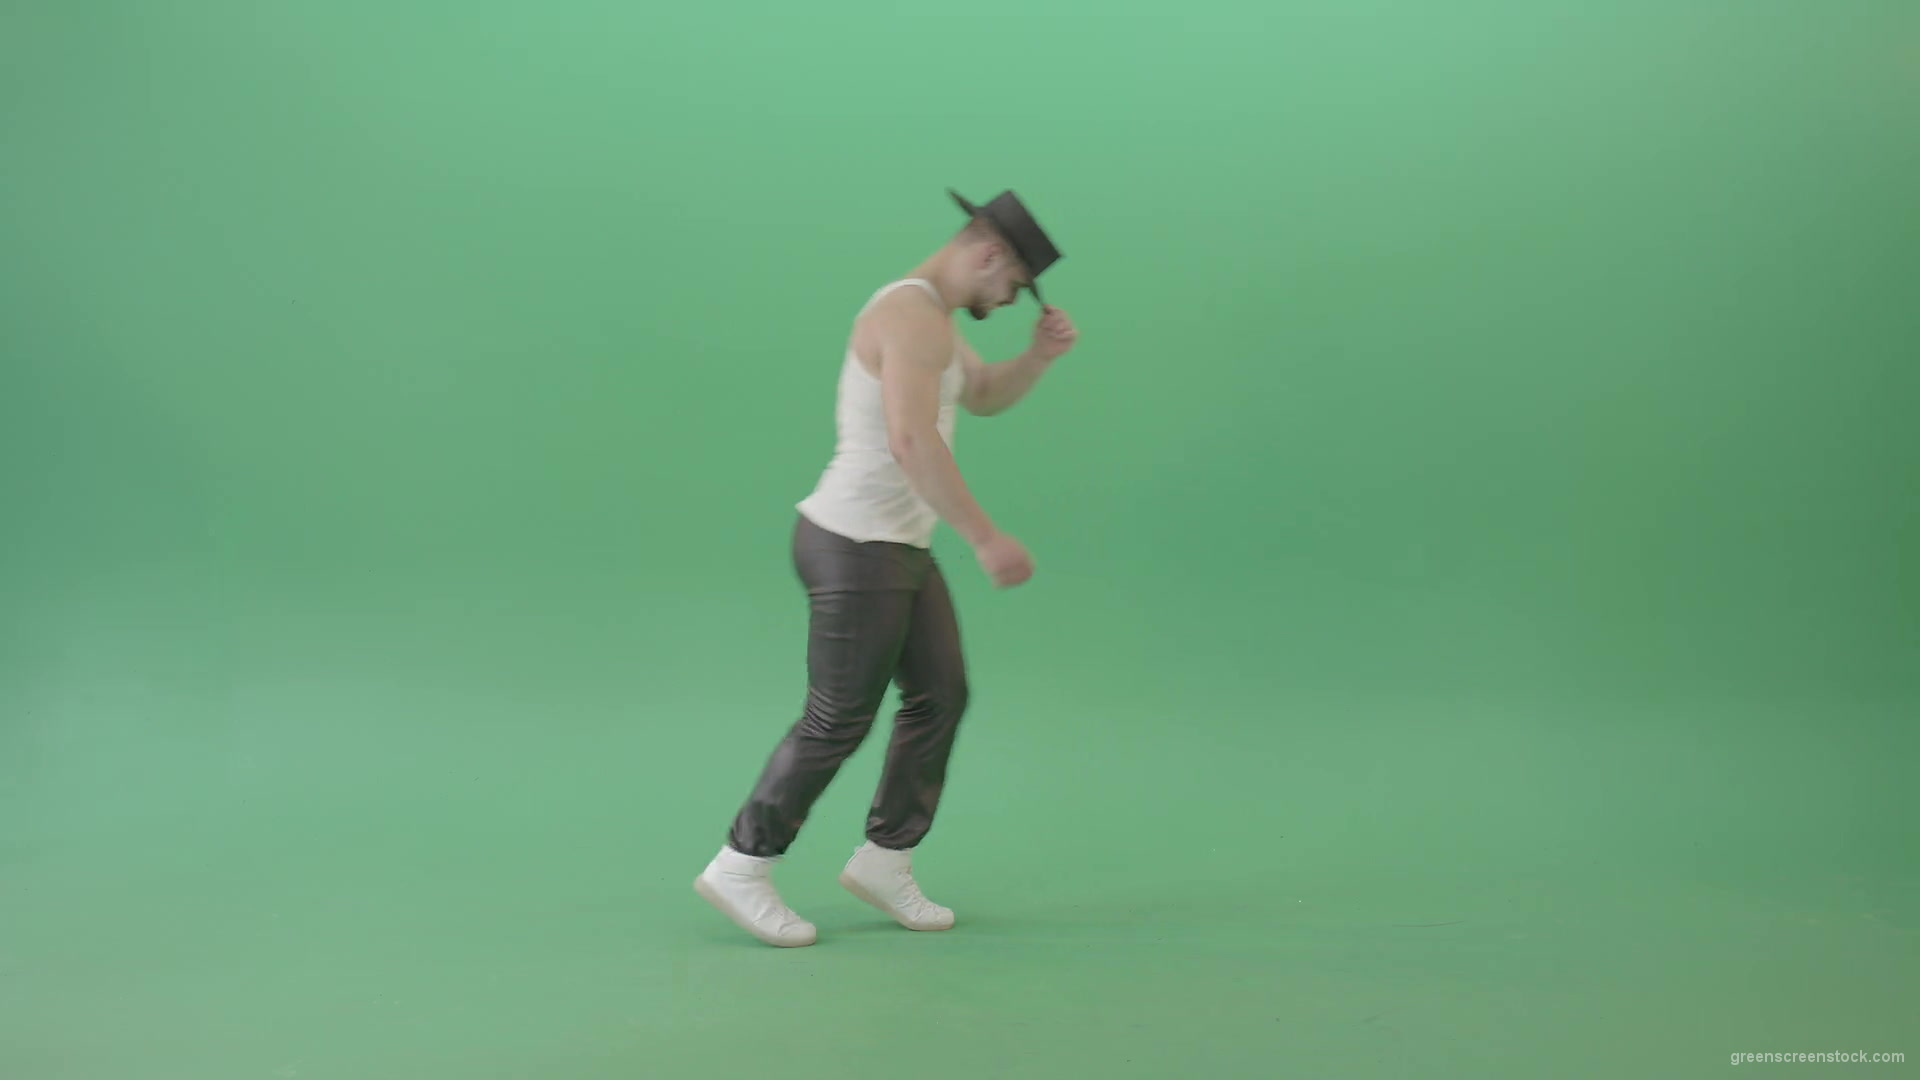 Adult-Man-makes-moonwalk-and-dancing-Pop-isolated-on-Green-Screen-4K-Video-Footage-1920_002 Green Screen Stock